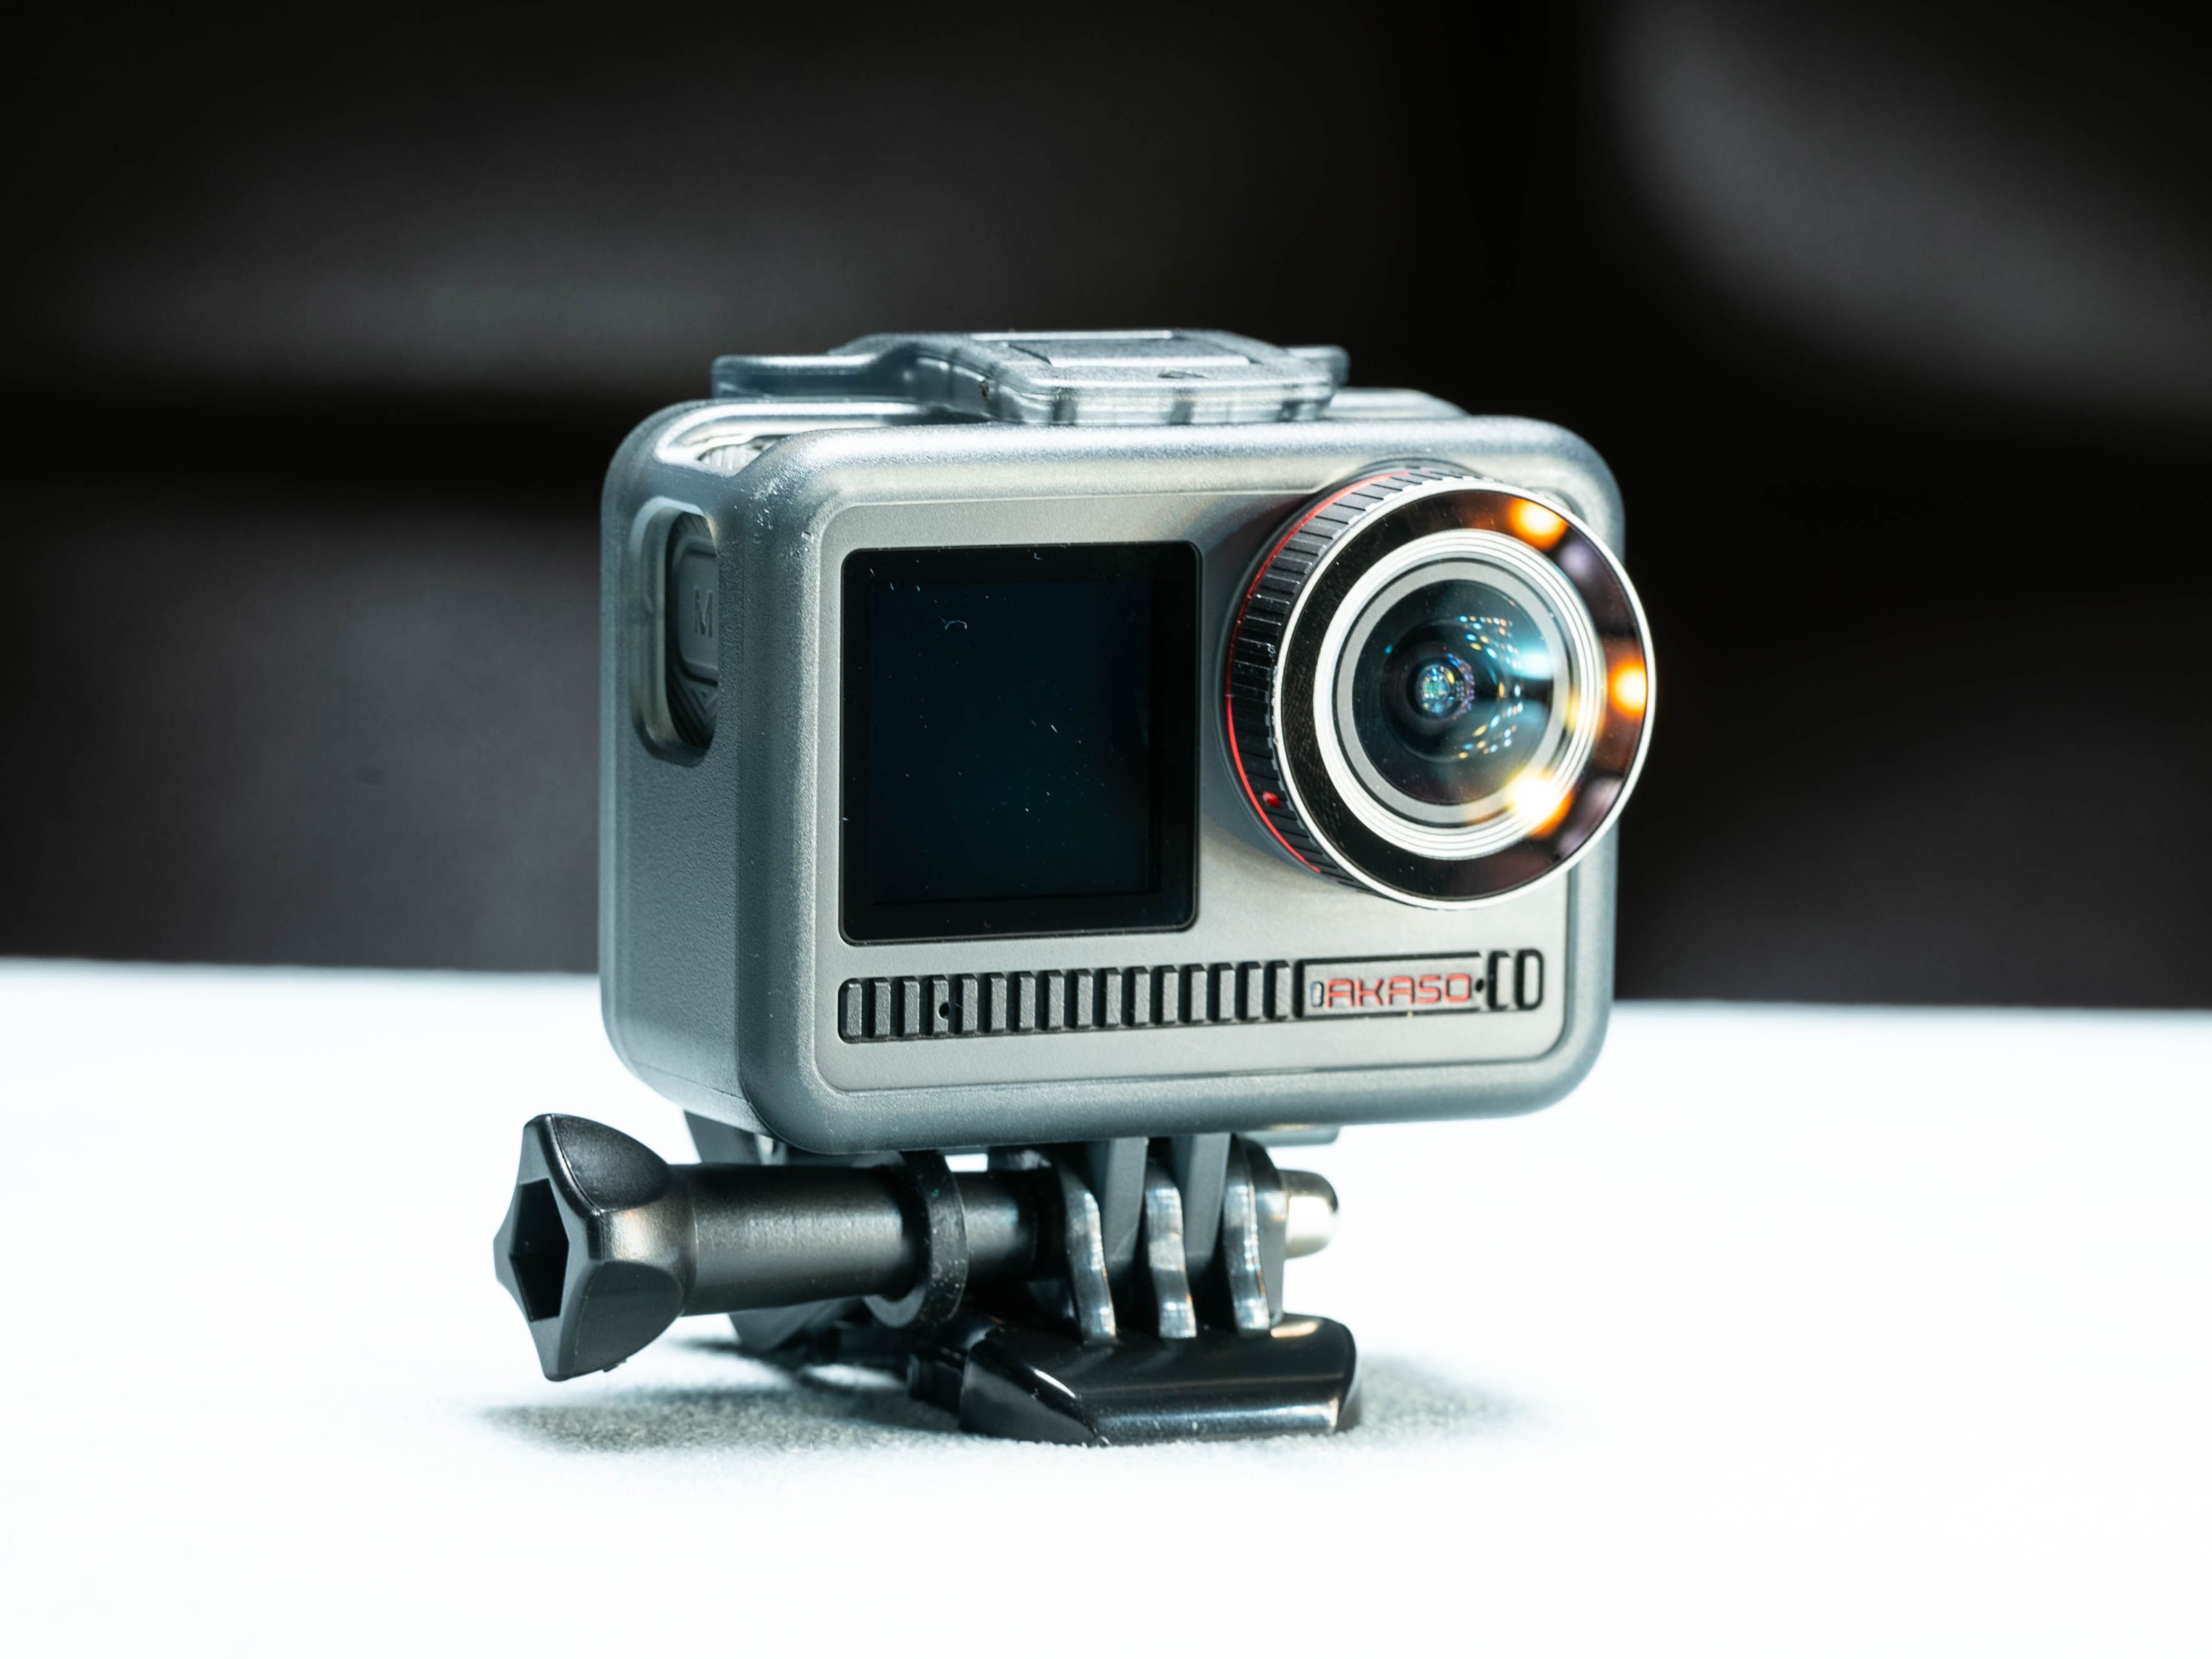 AKASO Brave 8 is an Expensive Action Camera With Unforgivably Buggy Software